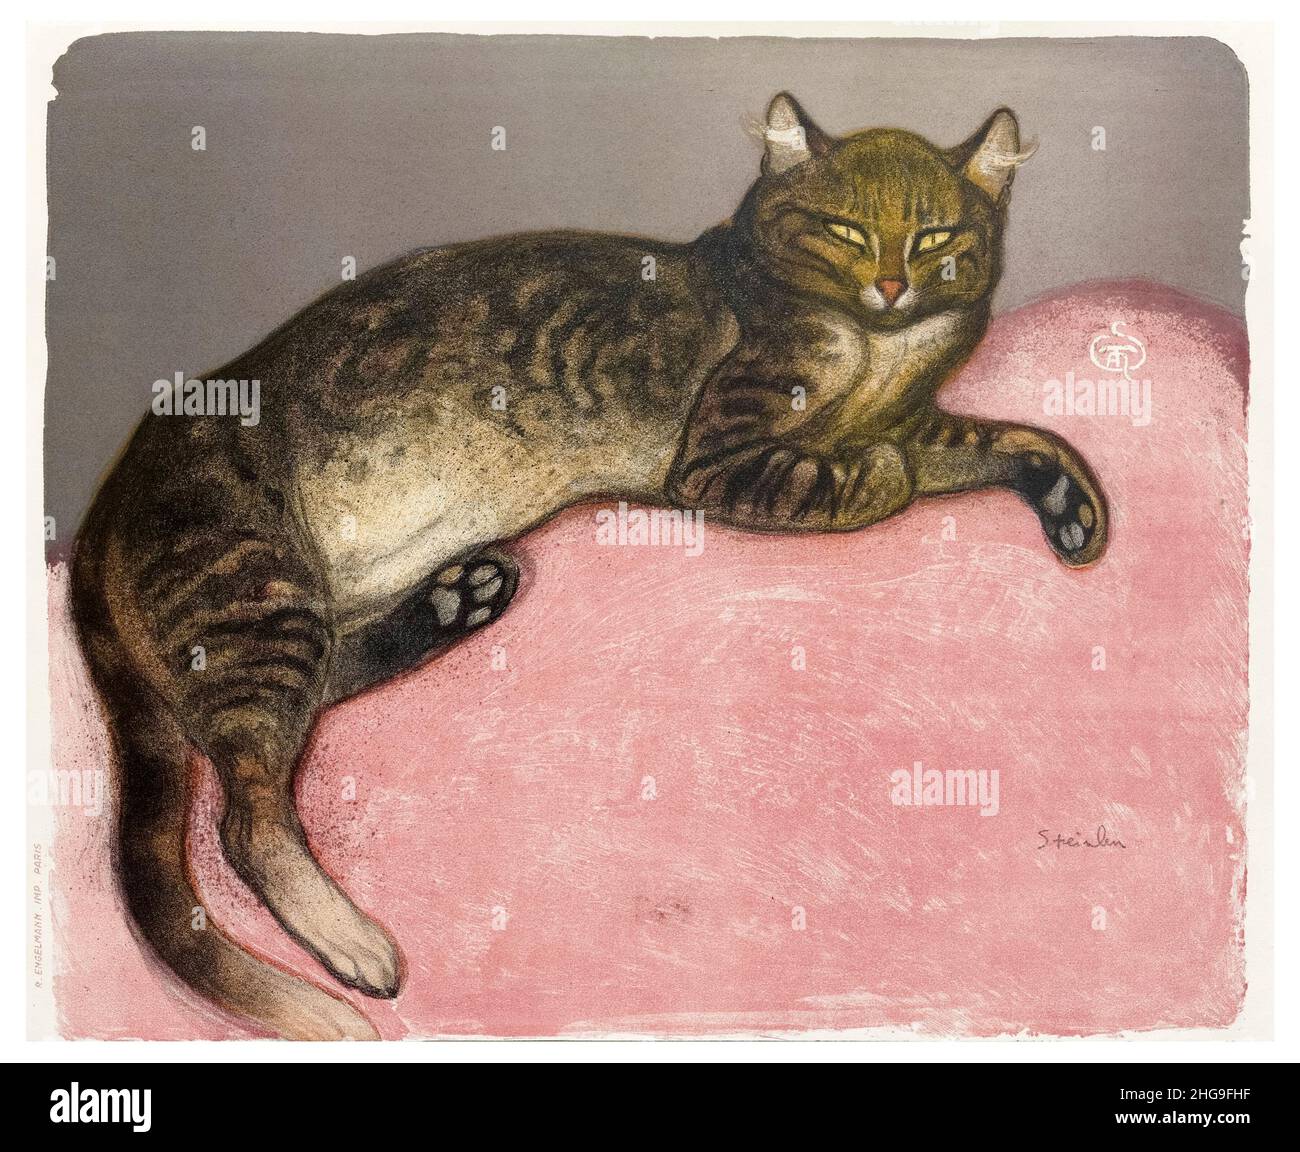 L’Hiver: Chat sur un coussin (Winter: Cat on a Cushion), lithographic print by Théophile Steinlen, 1909 Stock Photo